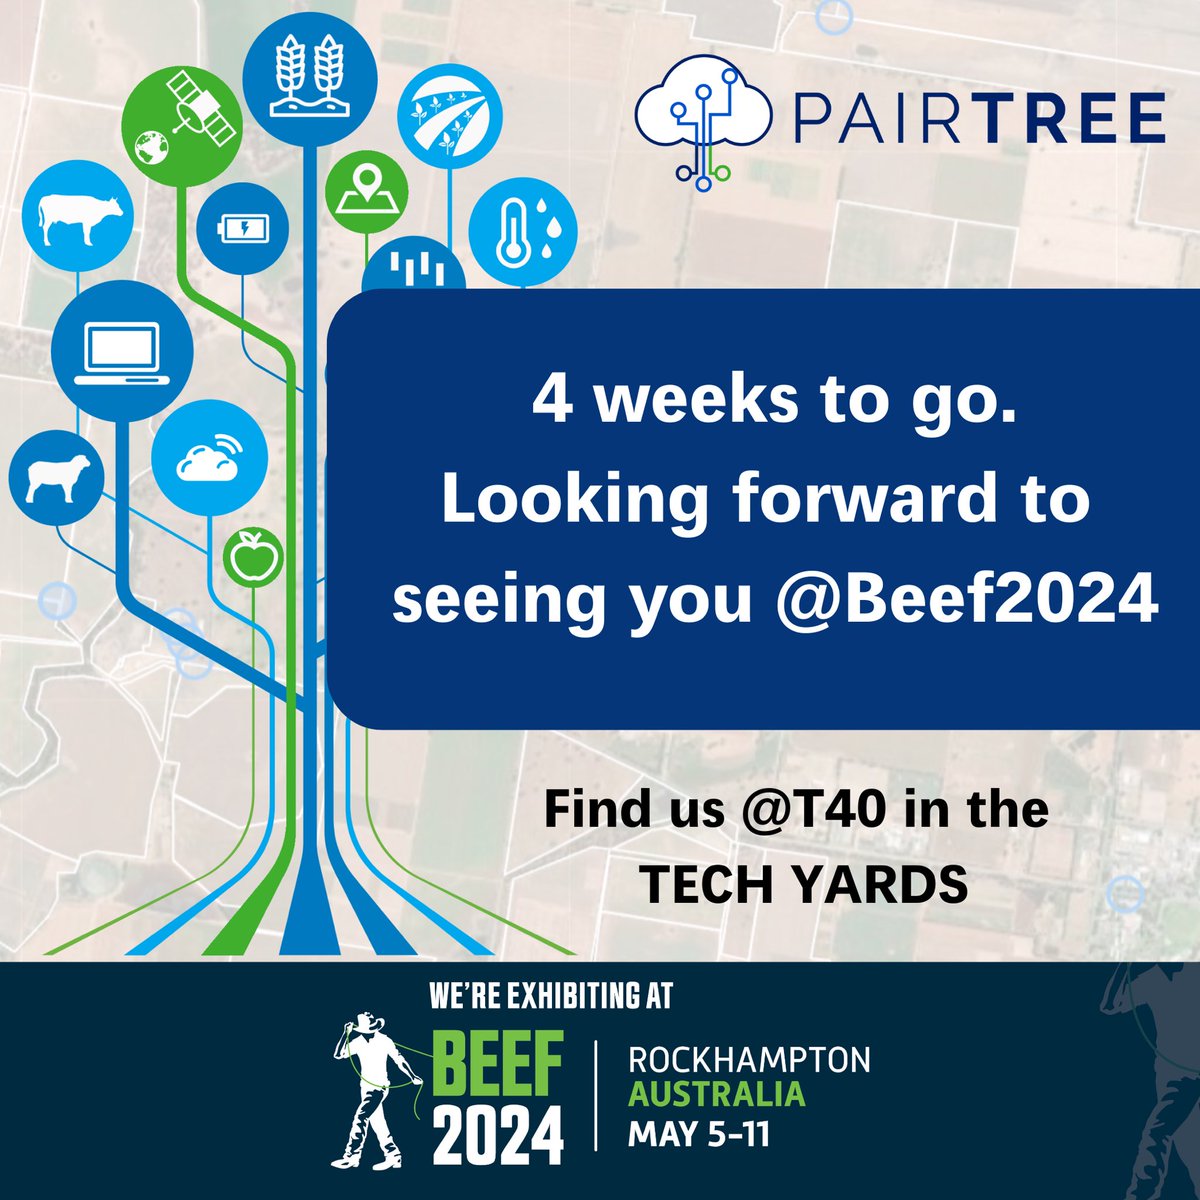 4 weeks out and we are looking forward to Australia’s biggest BEEF expo. @BeefAustralia #beefaustralia #Beef2024
If you’re a 
- Corporate drowning in data,
- Agribusiness connecting to farming clients
Visit us at T40
#collaborativeagriculture #ausagritech #dataatyourfingertips